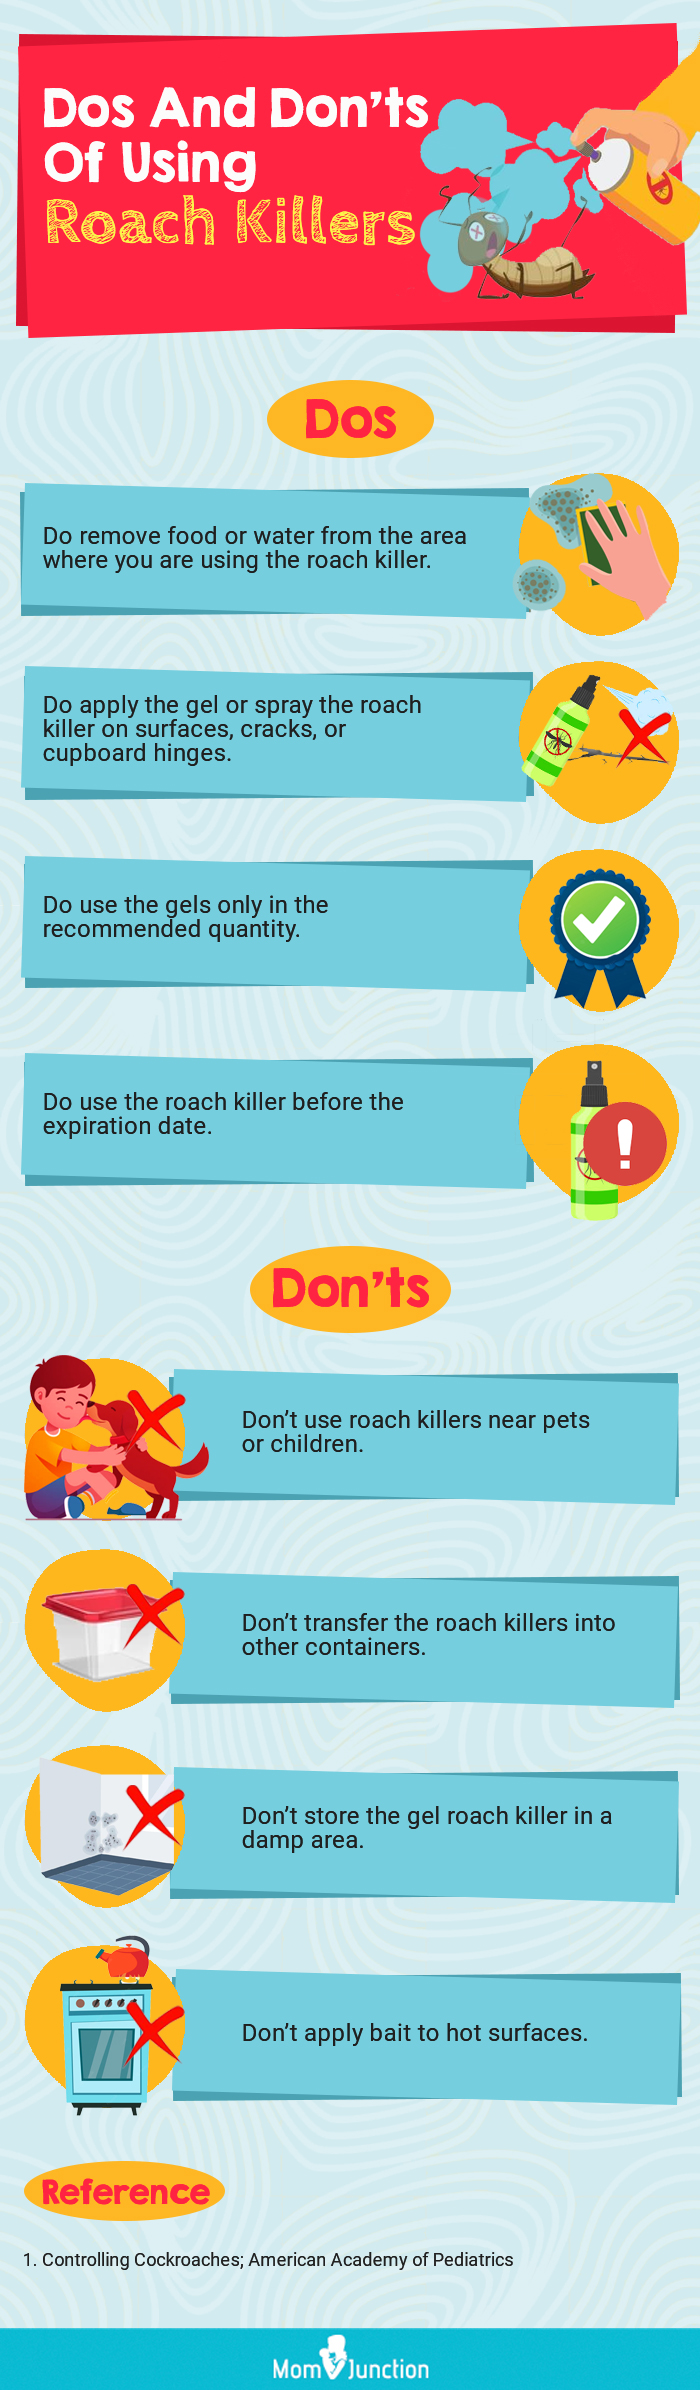 Dos And Don’ts Of Using Roach Killers